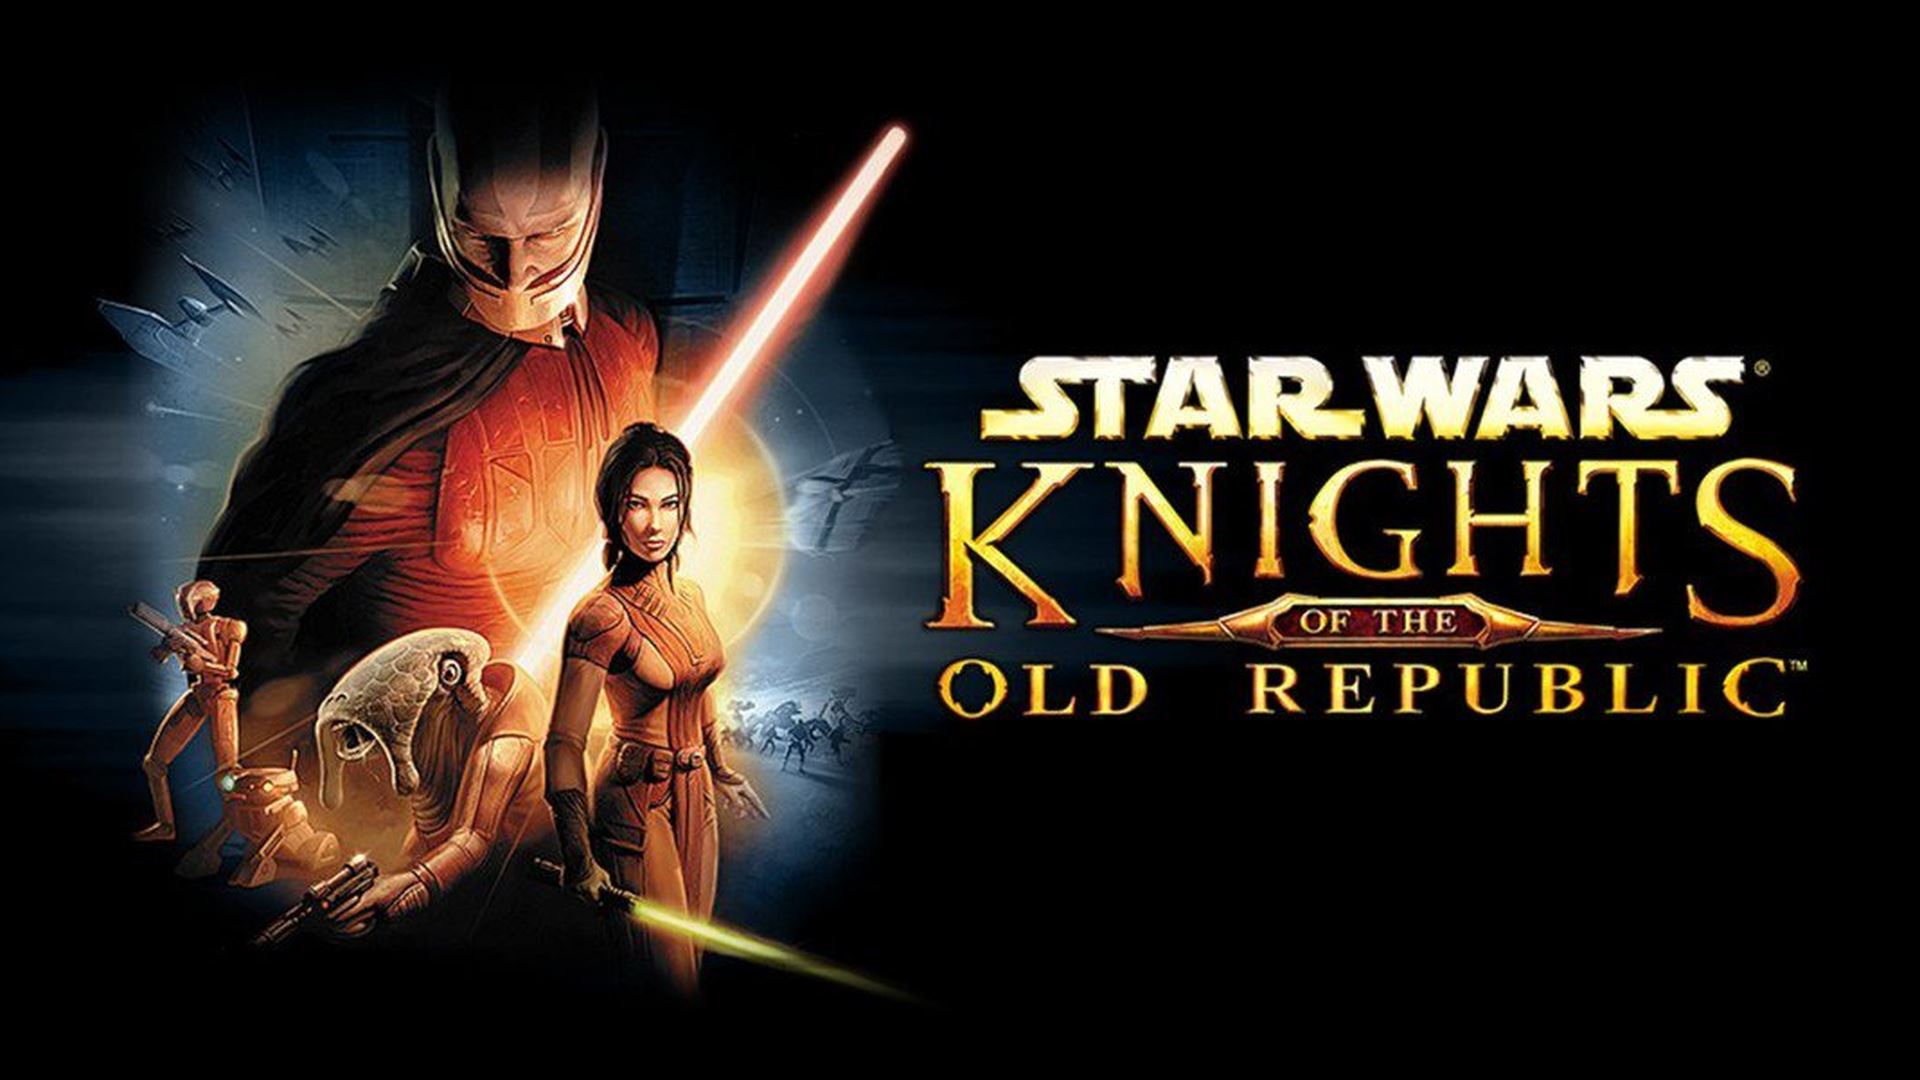 retro-game-review-star-wars-knights-of-the-old-republic-star-wars-news-net